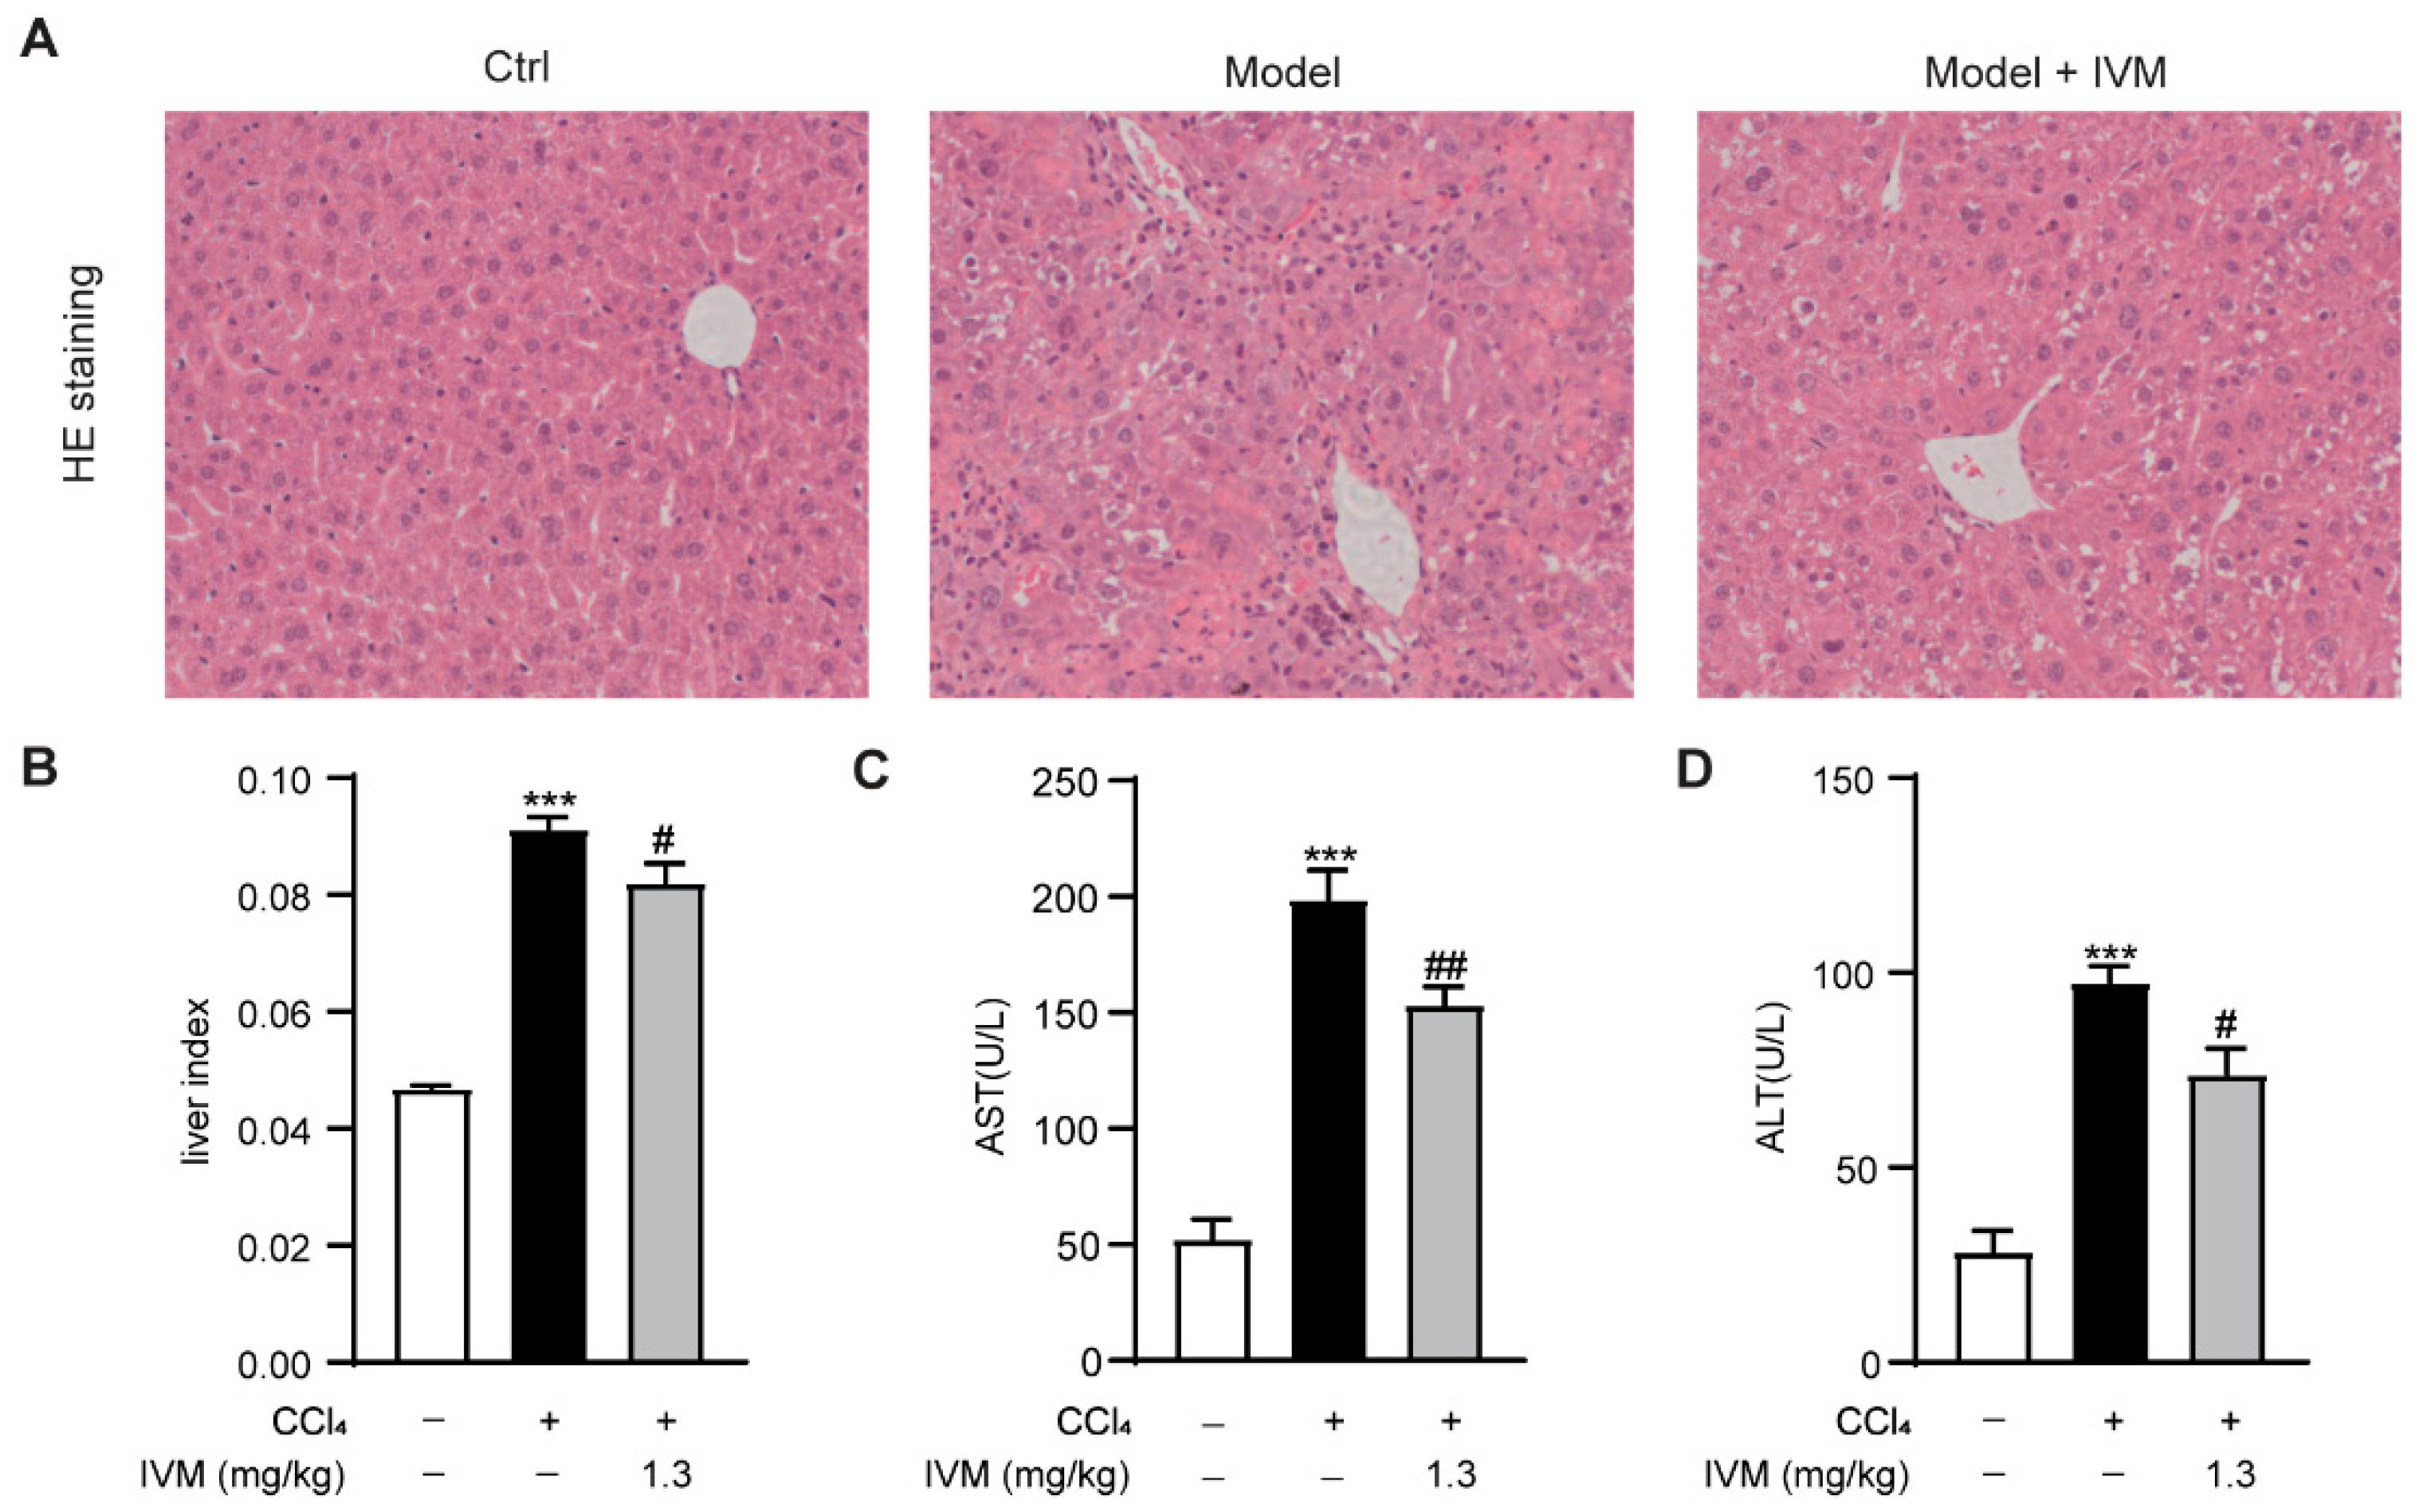 Ijms Free Full Text Ivermectin Attenuates Ccl4 Induced Liver Fibrosis In Mice By Suppressing